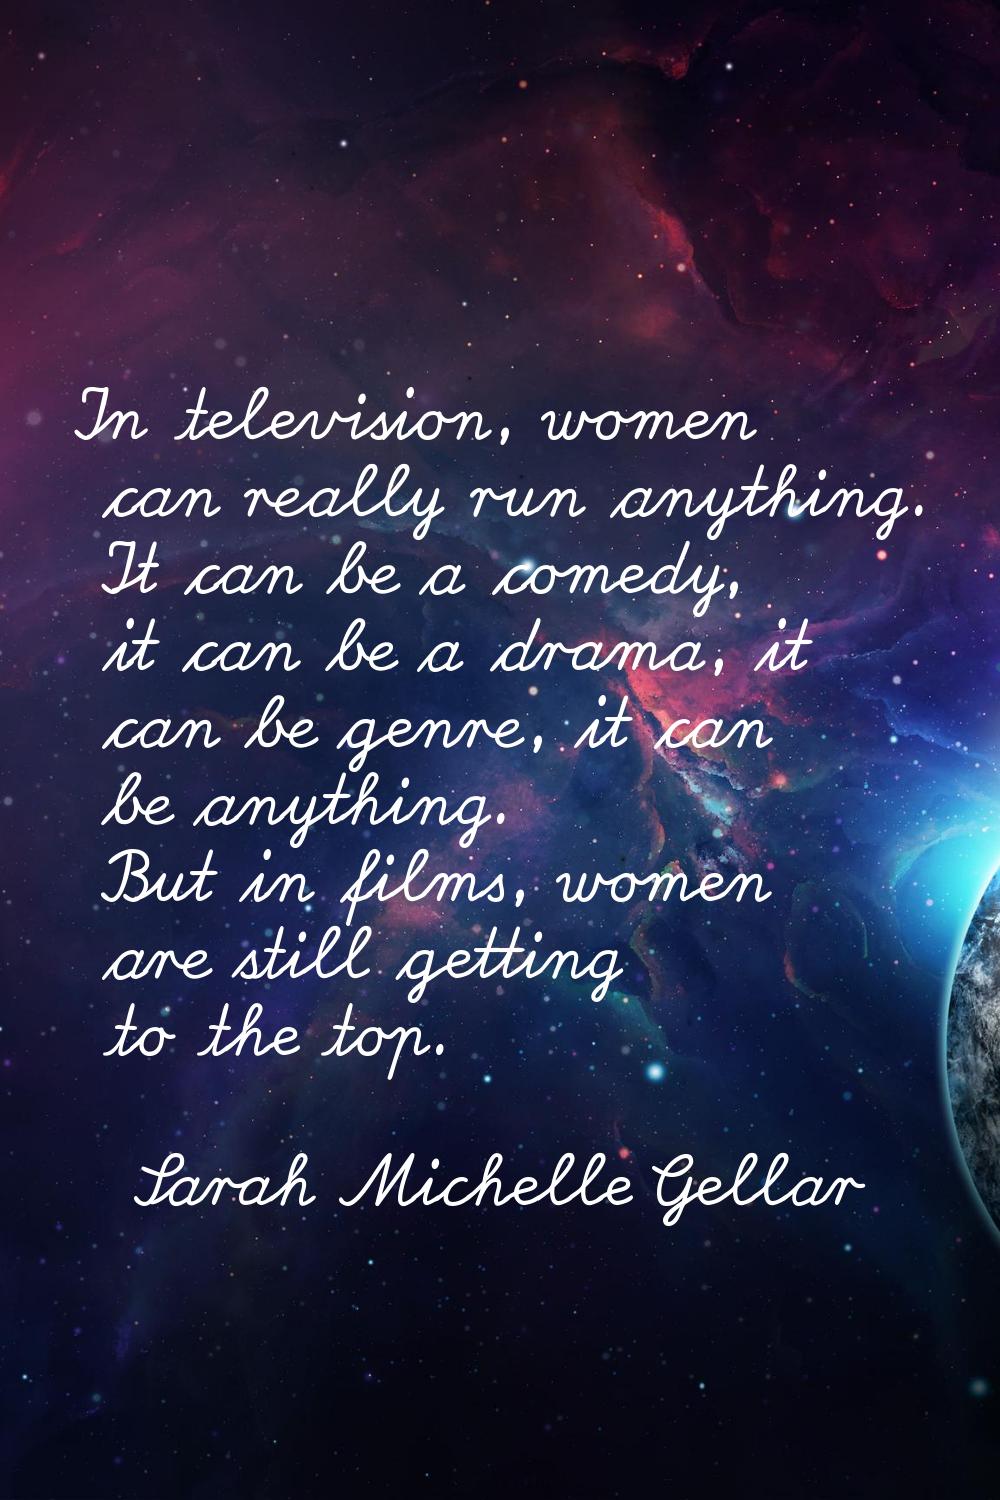 In television, women can really run anything. It can be a comedy, it can be a drama, it can be genr